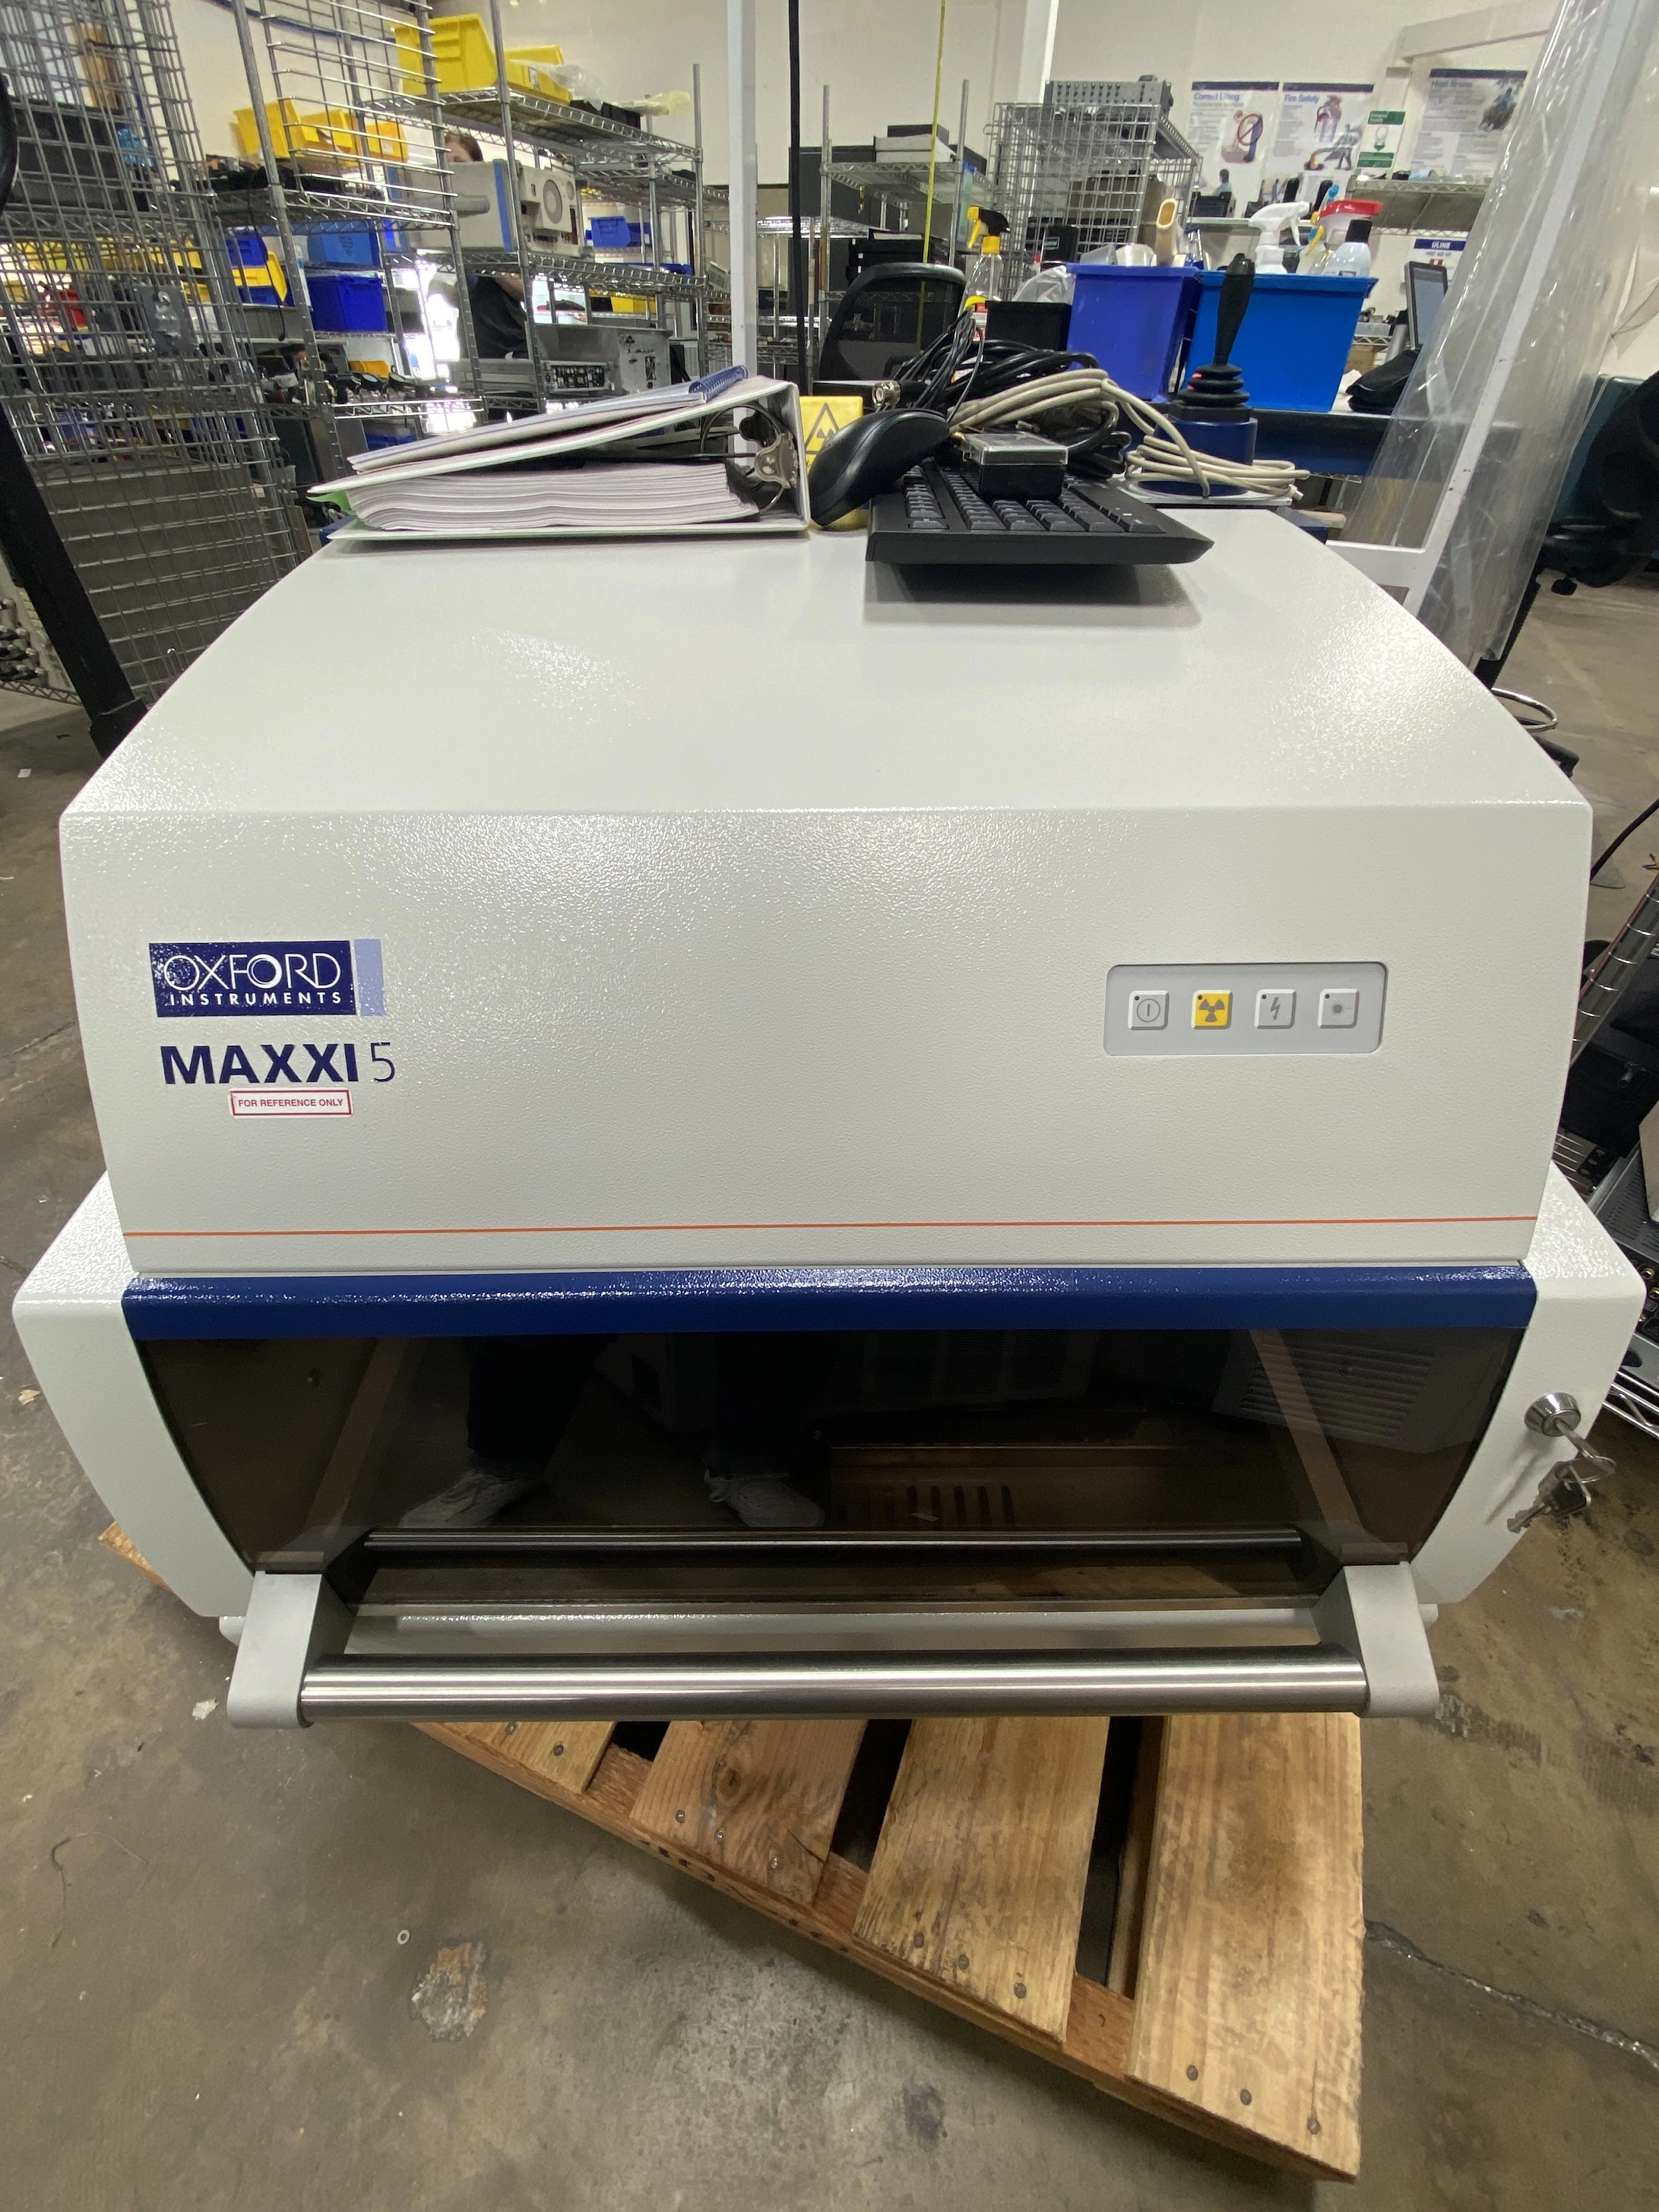 Oxford Instruments MAXXI 5 Coating Thickness Measurement and Material Analysis